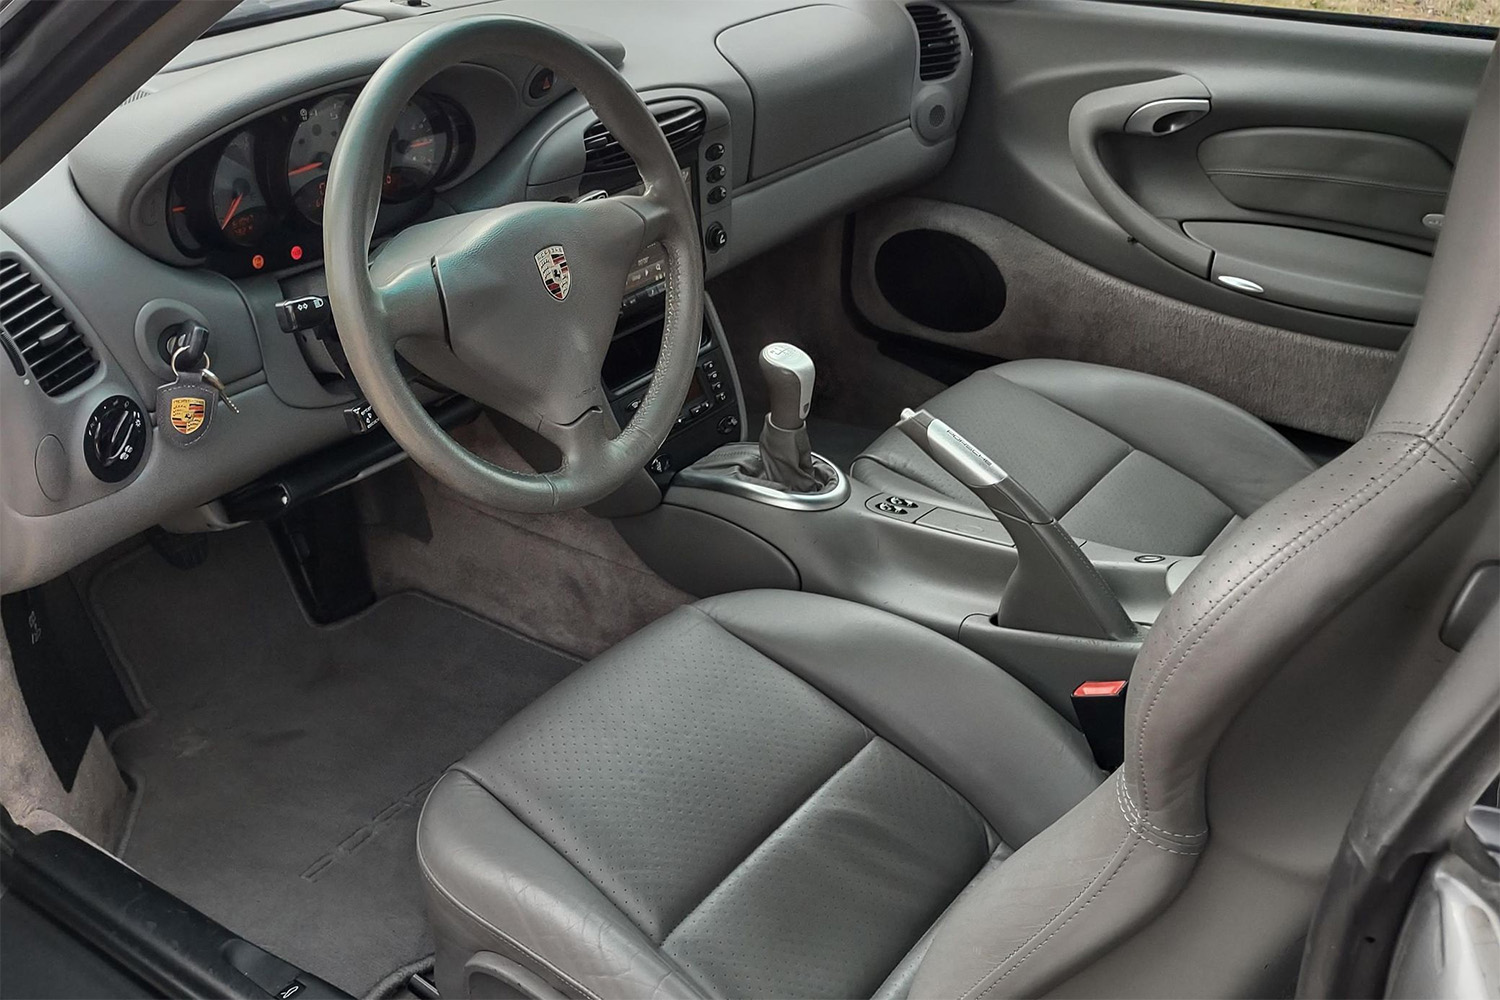 Interior of 2001 Porsche 911 996 Carrera 2 base coupe with technic and sport package